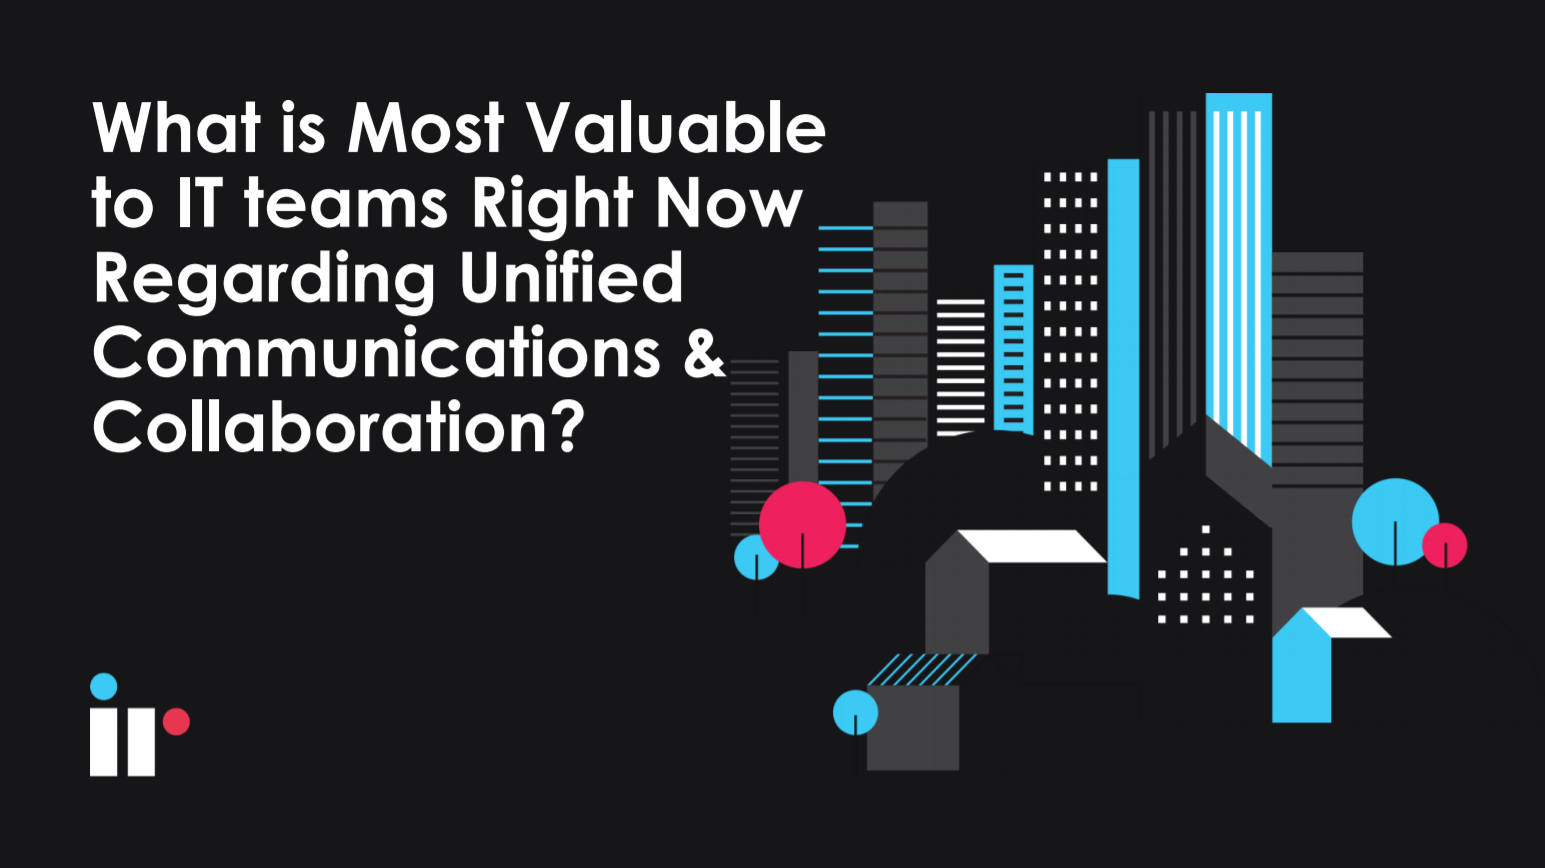 What is most valuable to IT right now